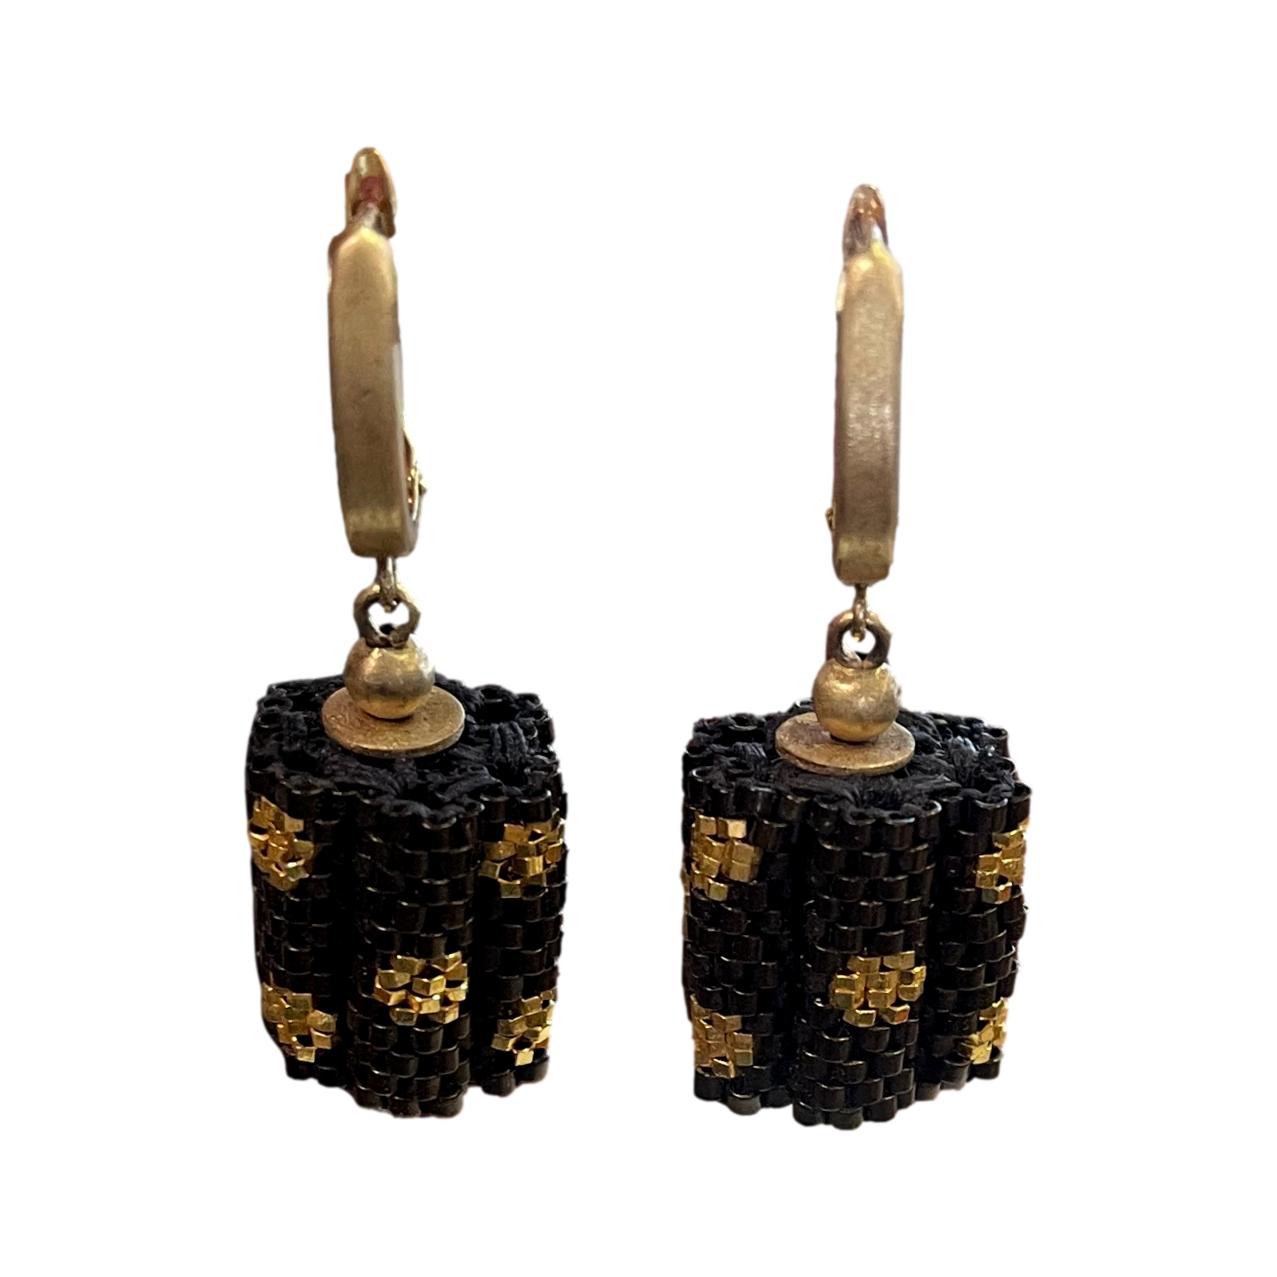 Mesh Handmade Earrings with Gold and Chocolate Brown From India